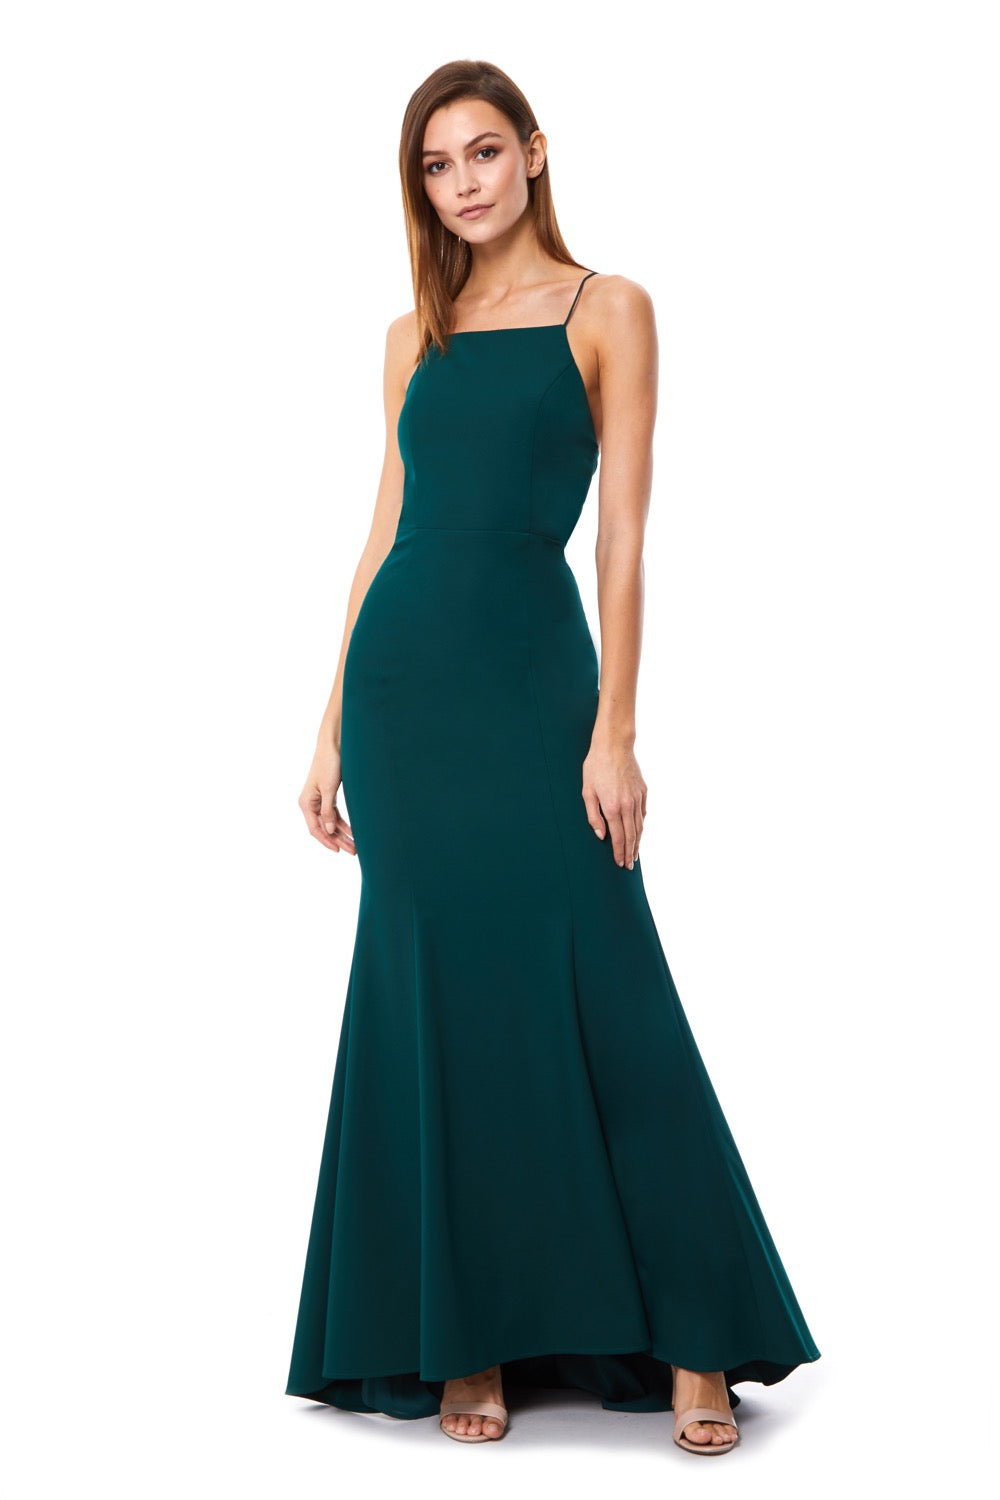 Jarlo Jemima square neck green maxi dress with open back